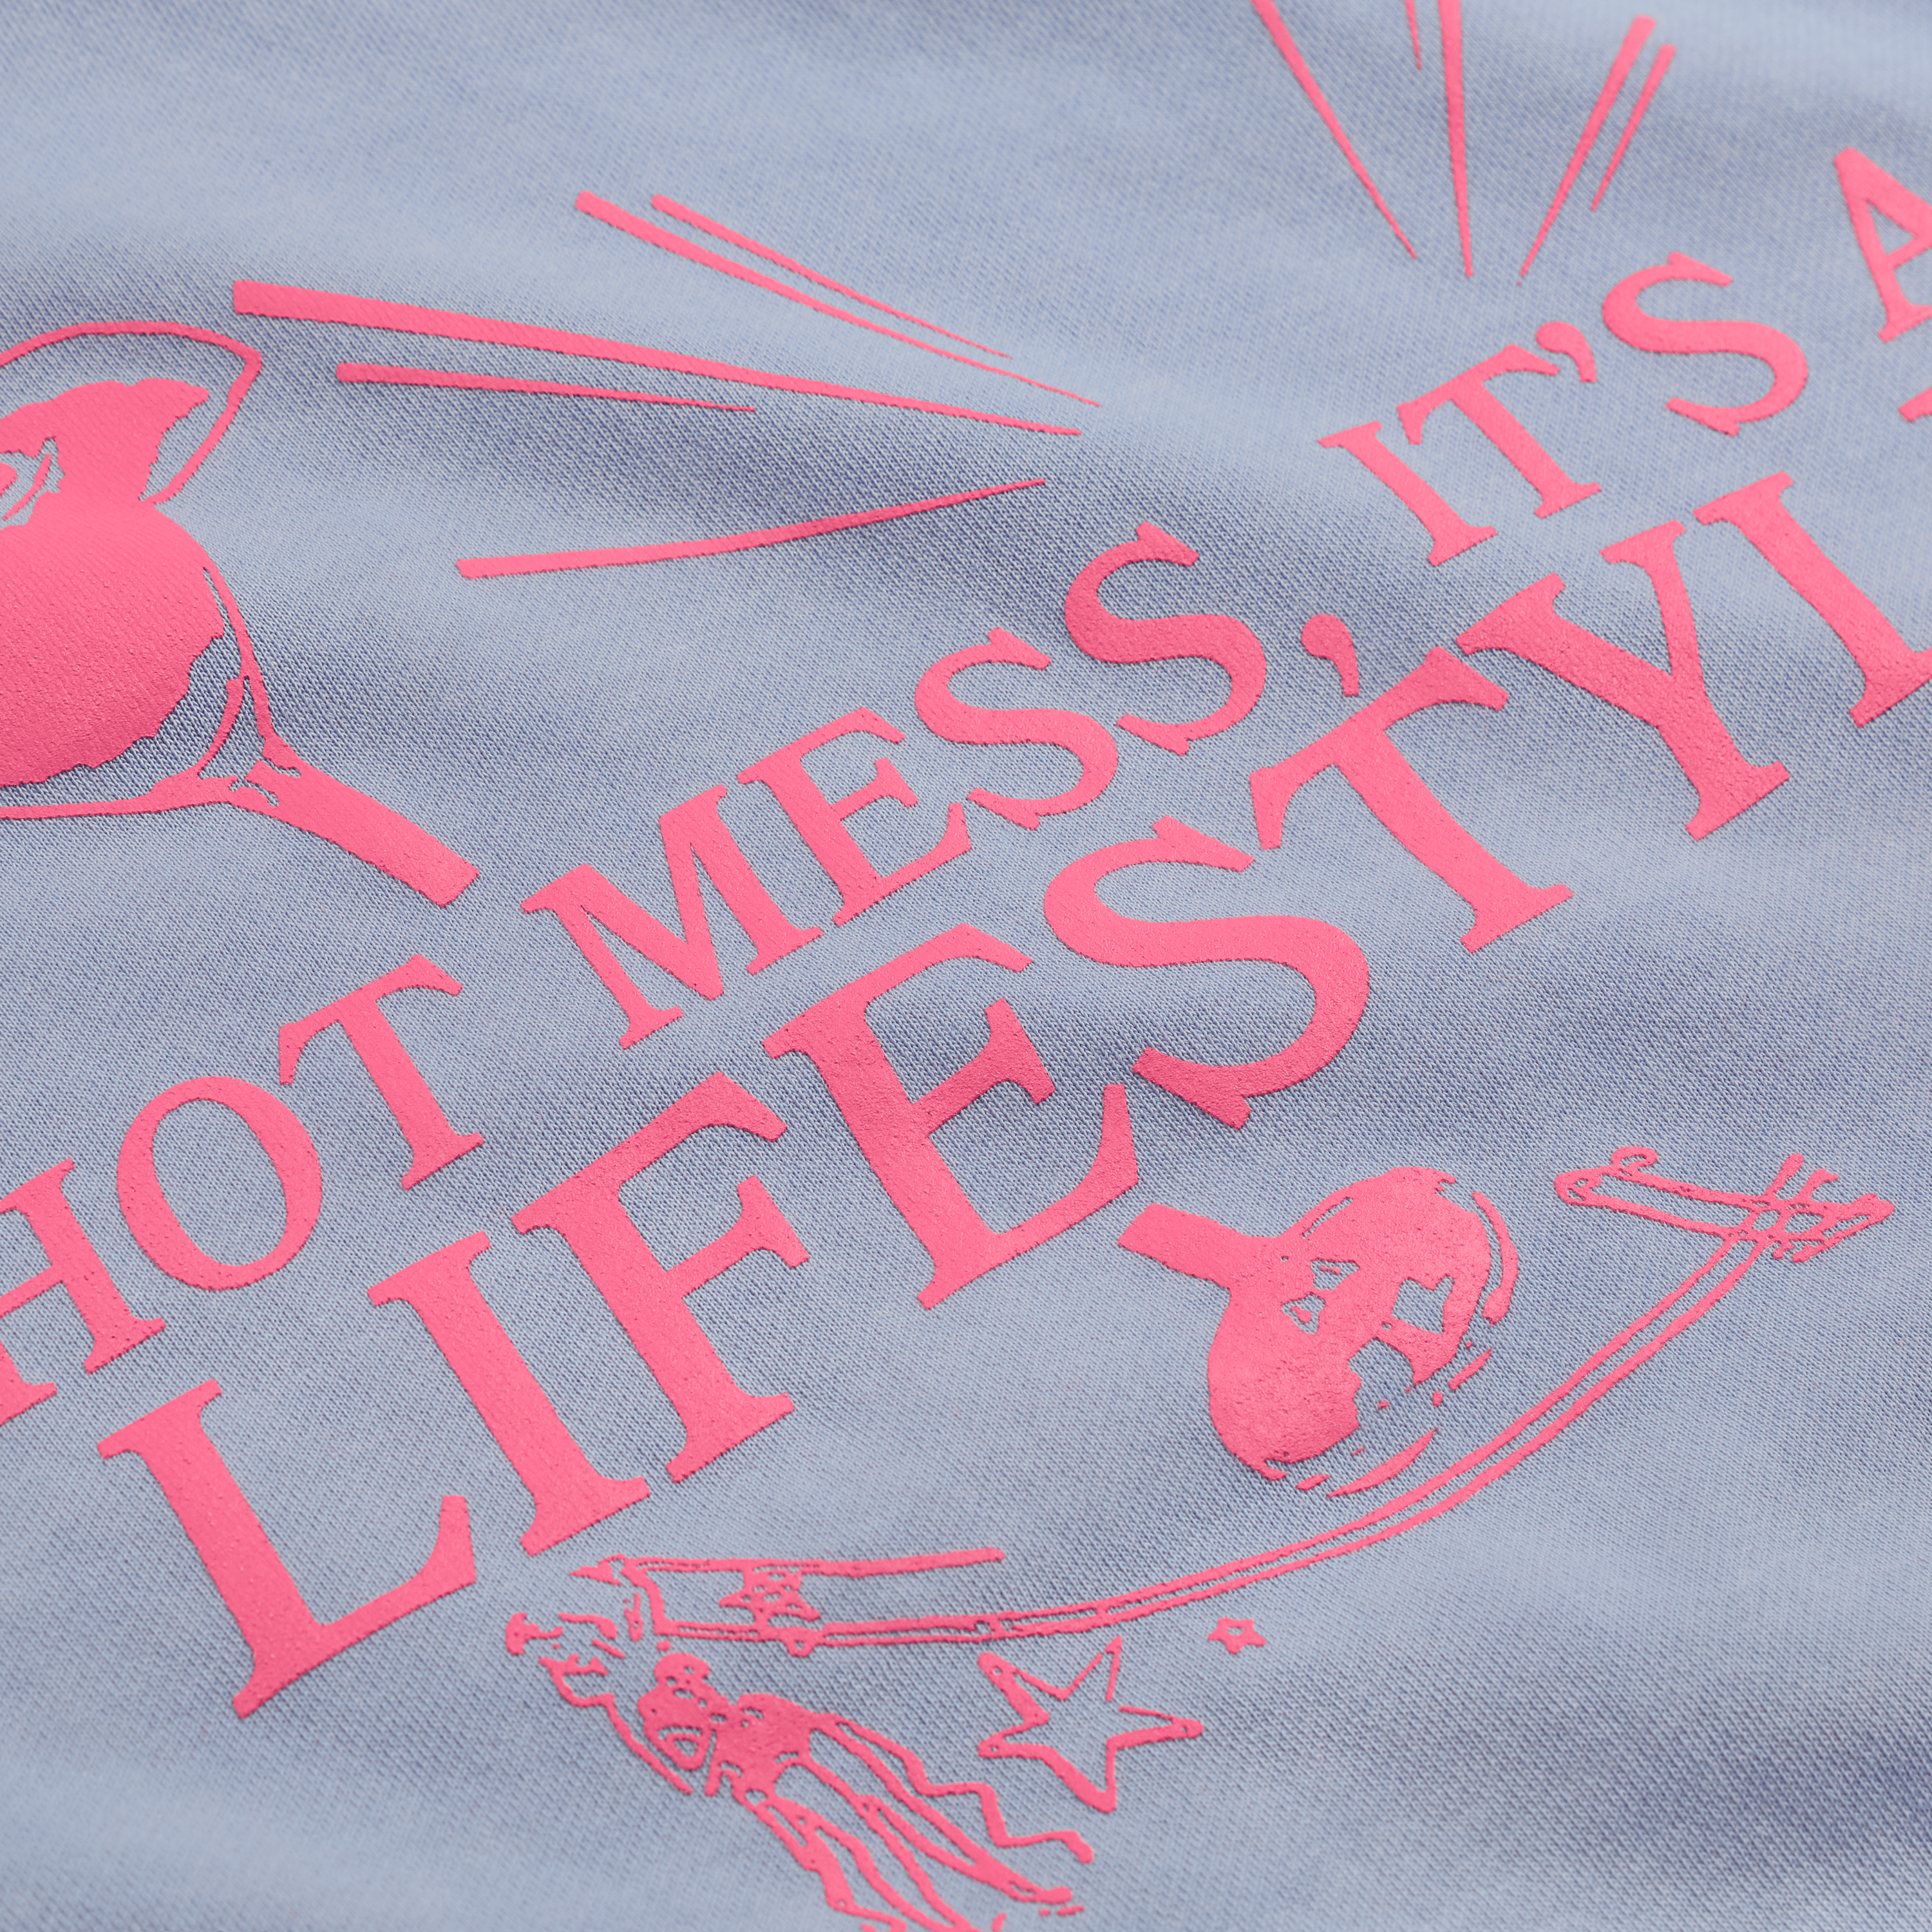 HOT MESS, IT'S A LIFESTYLE HOODIE (BLUE)